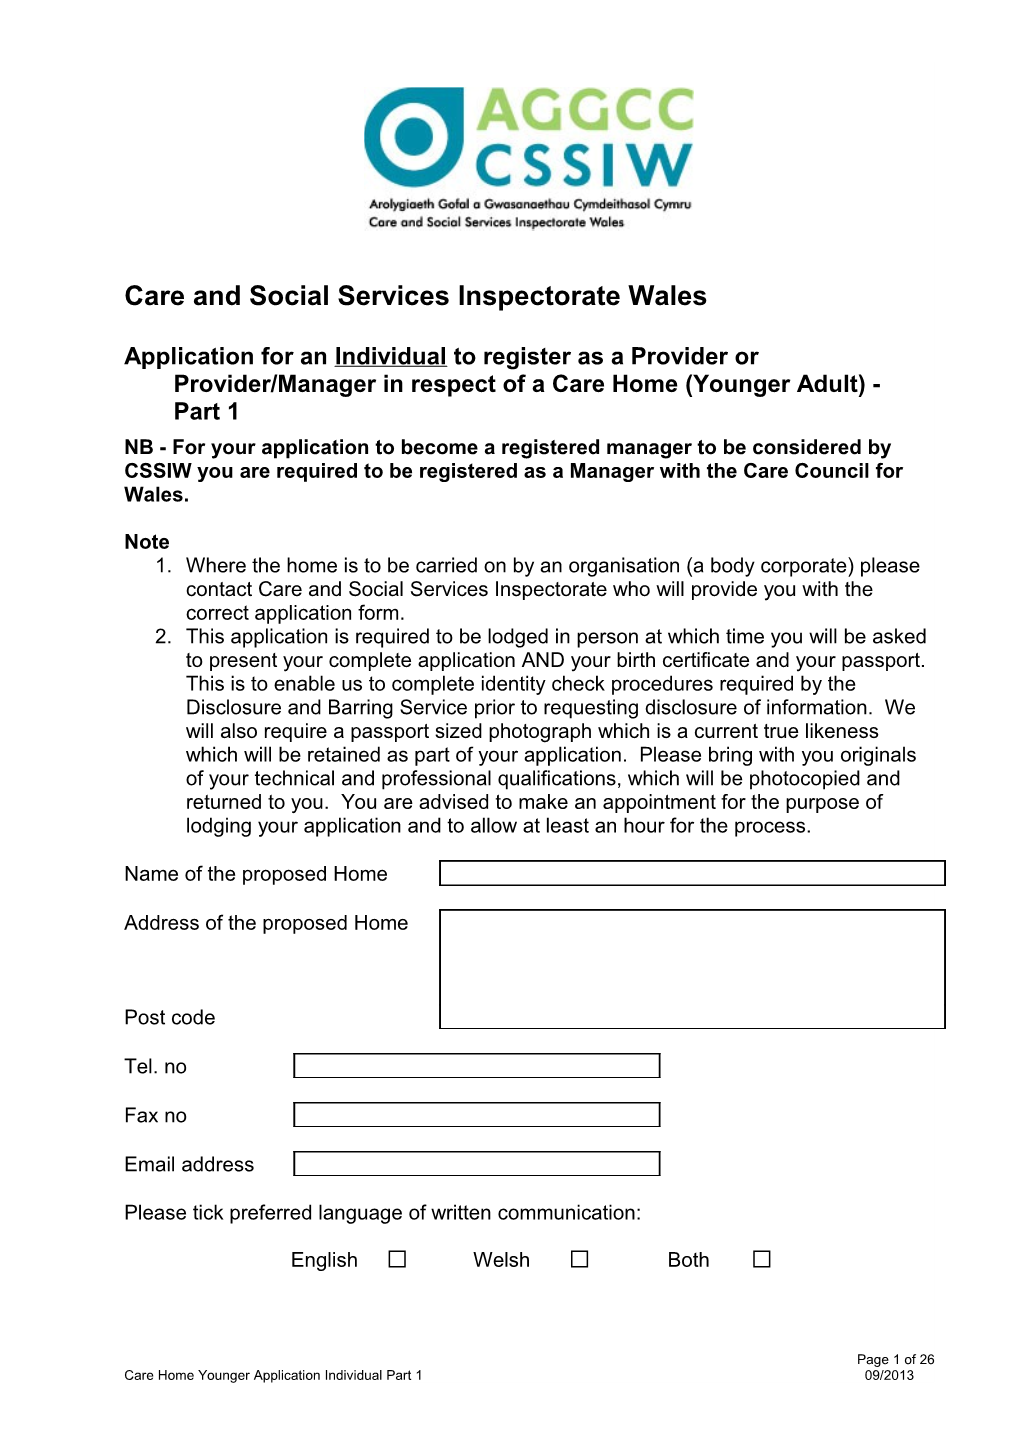 Application for Organisation in Respect of a Care Home Part 1